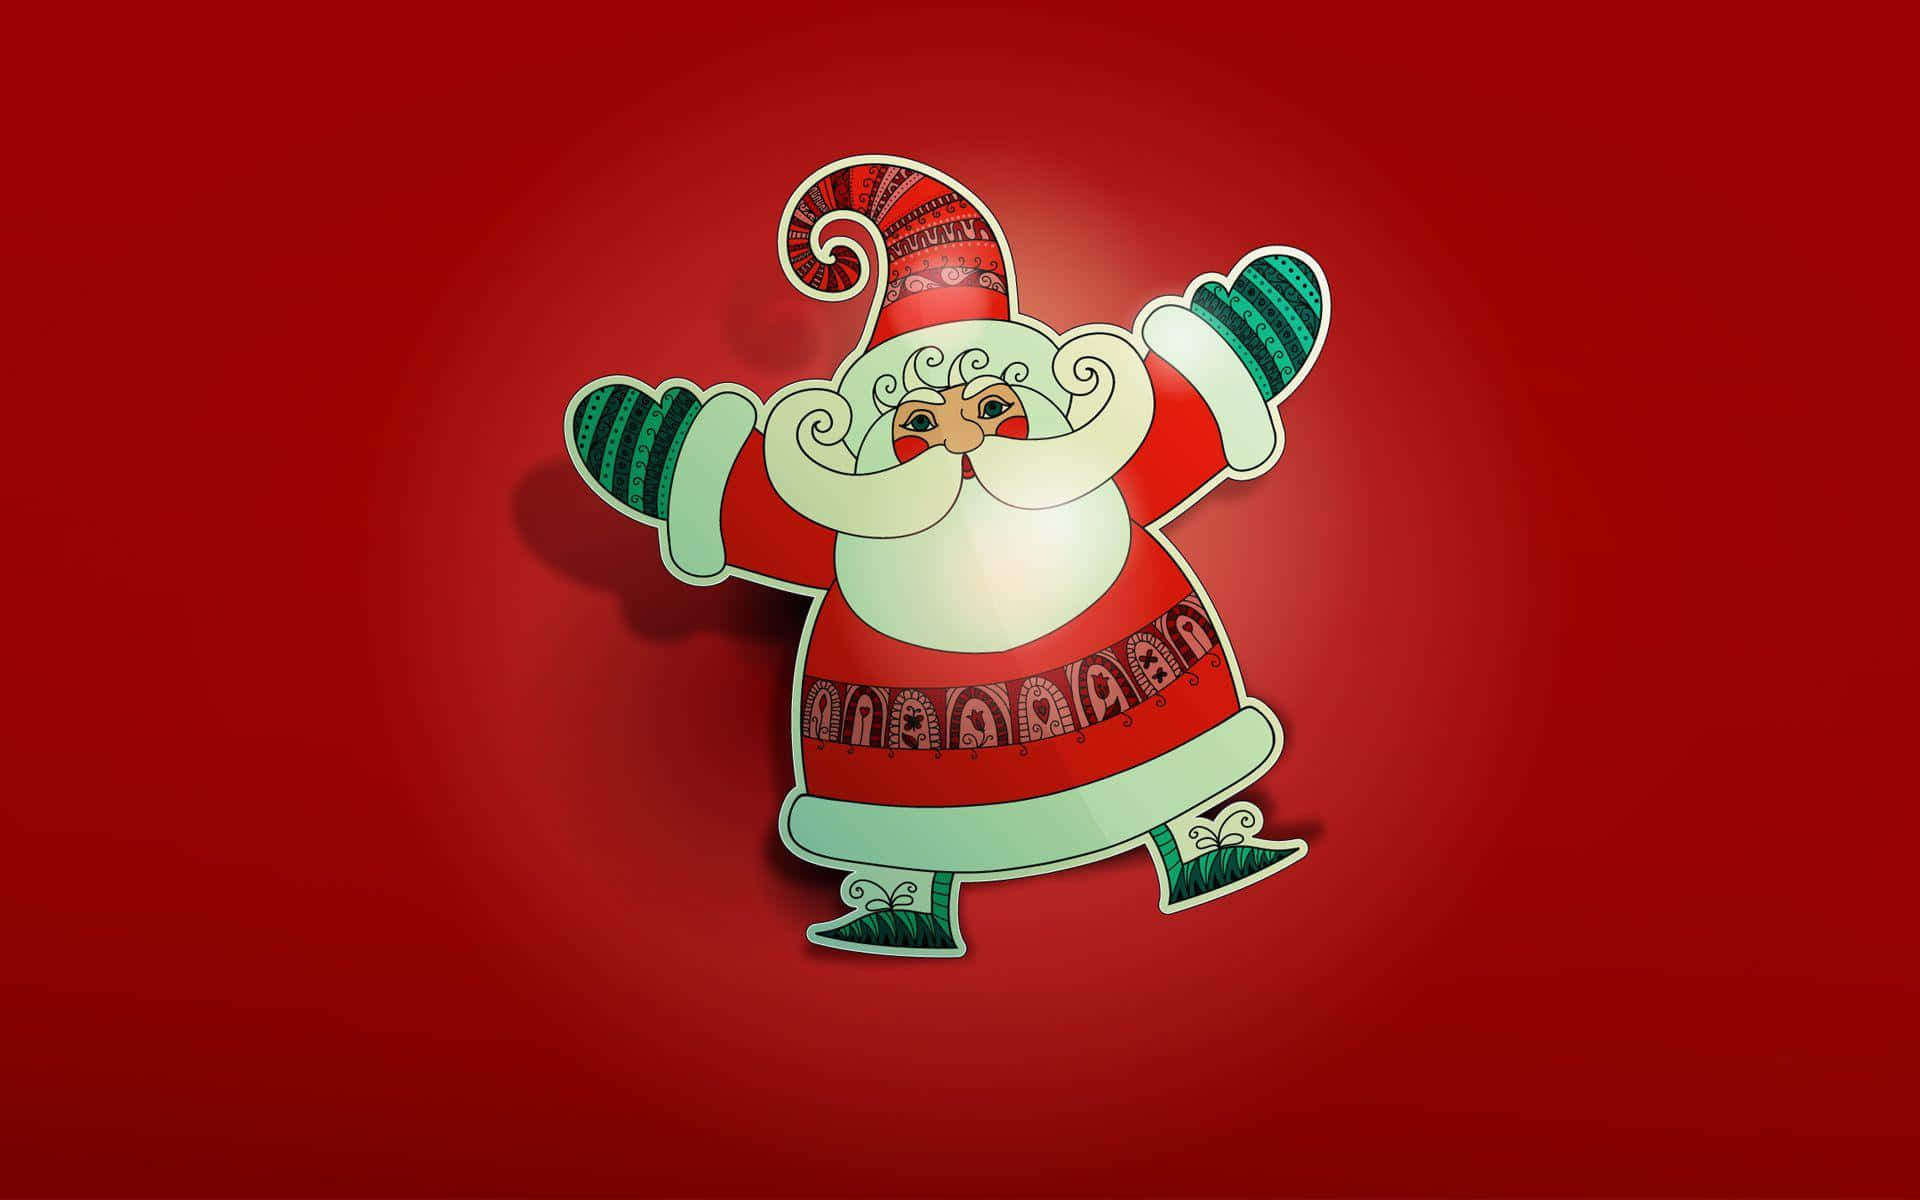 Santa Claus delivering presents to children on Christmas Eve Wallpaper